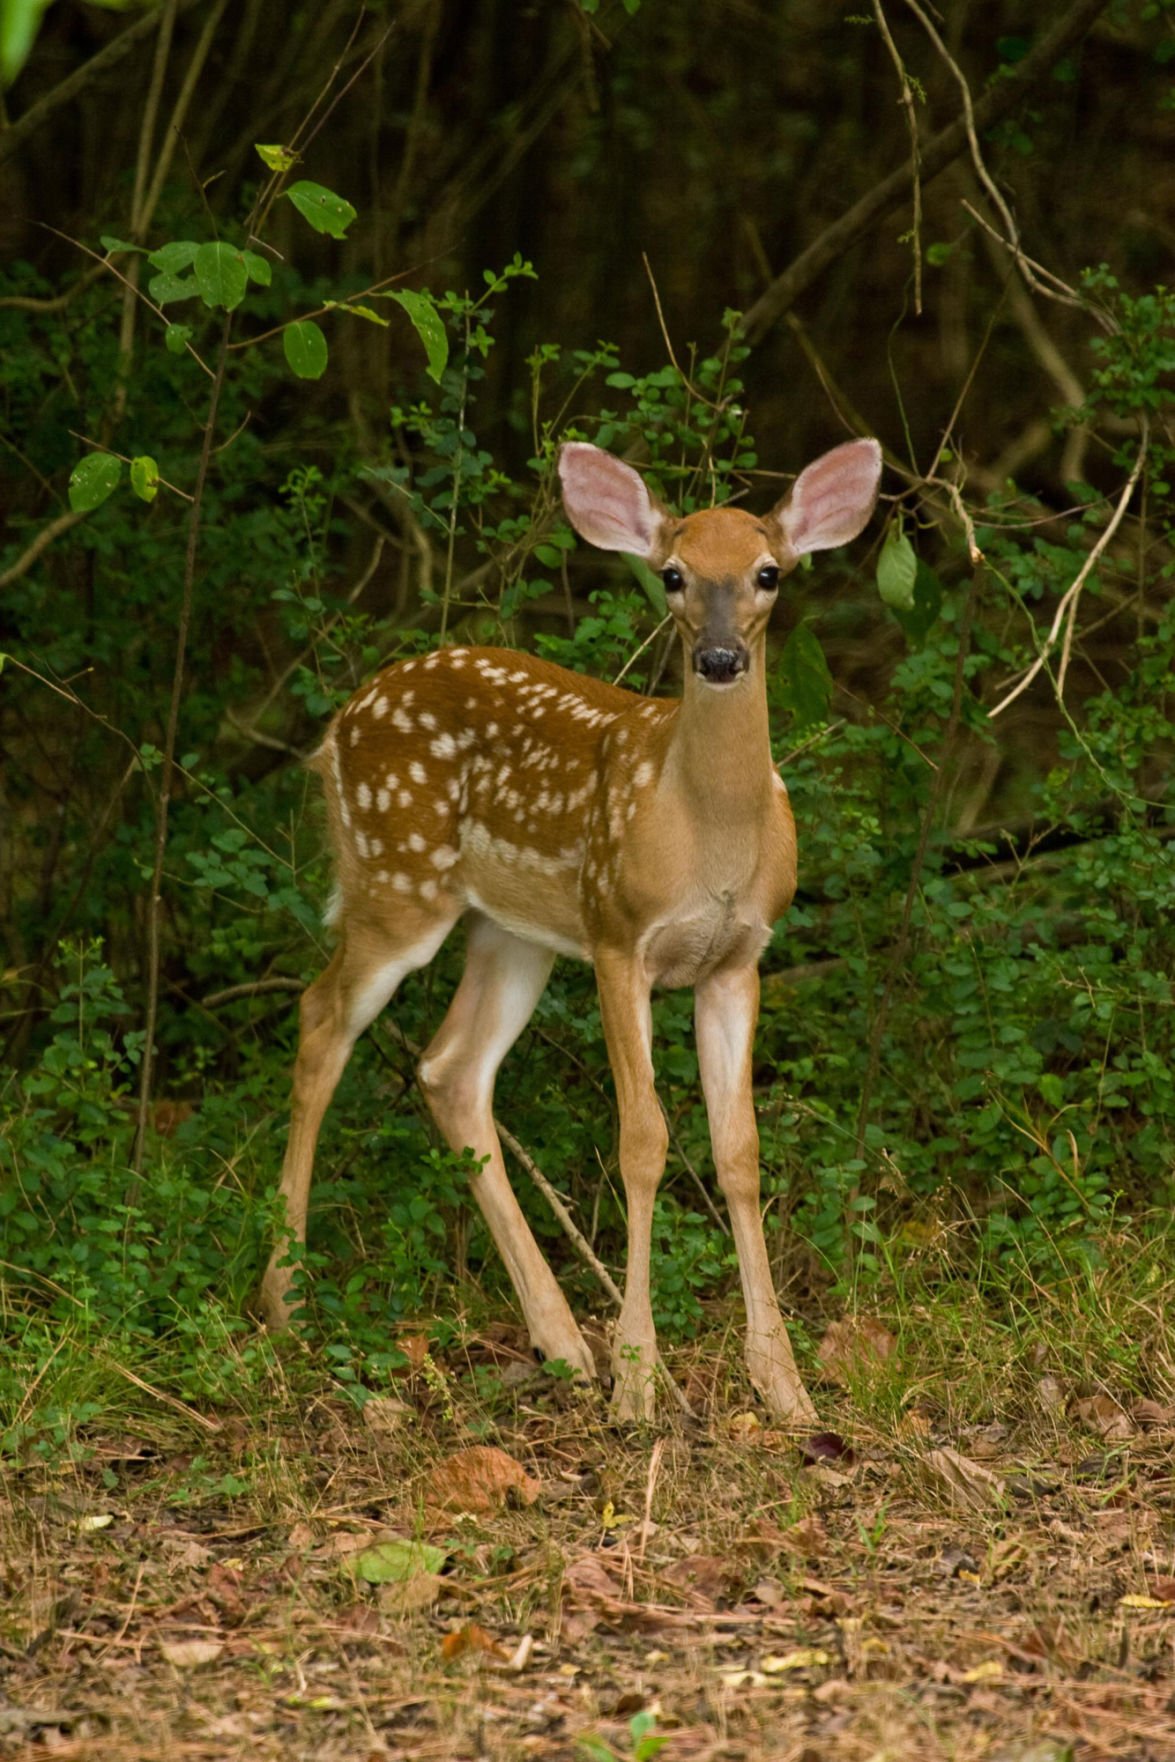 Early movements crucial to whitetail fawn | Sports | albanyherald.com